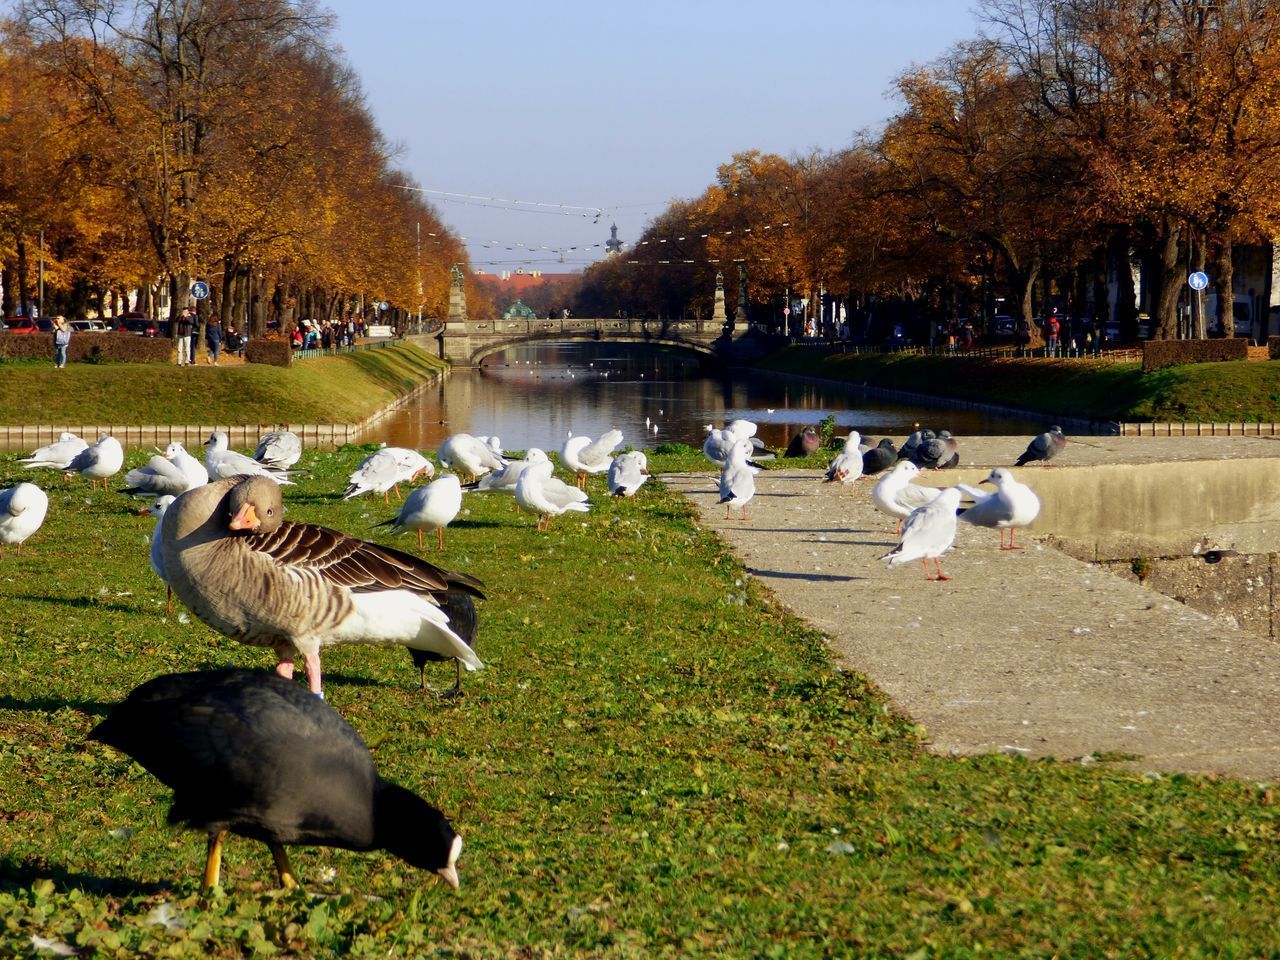 VIEW OF DUCKS IN PARK